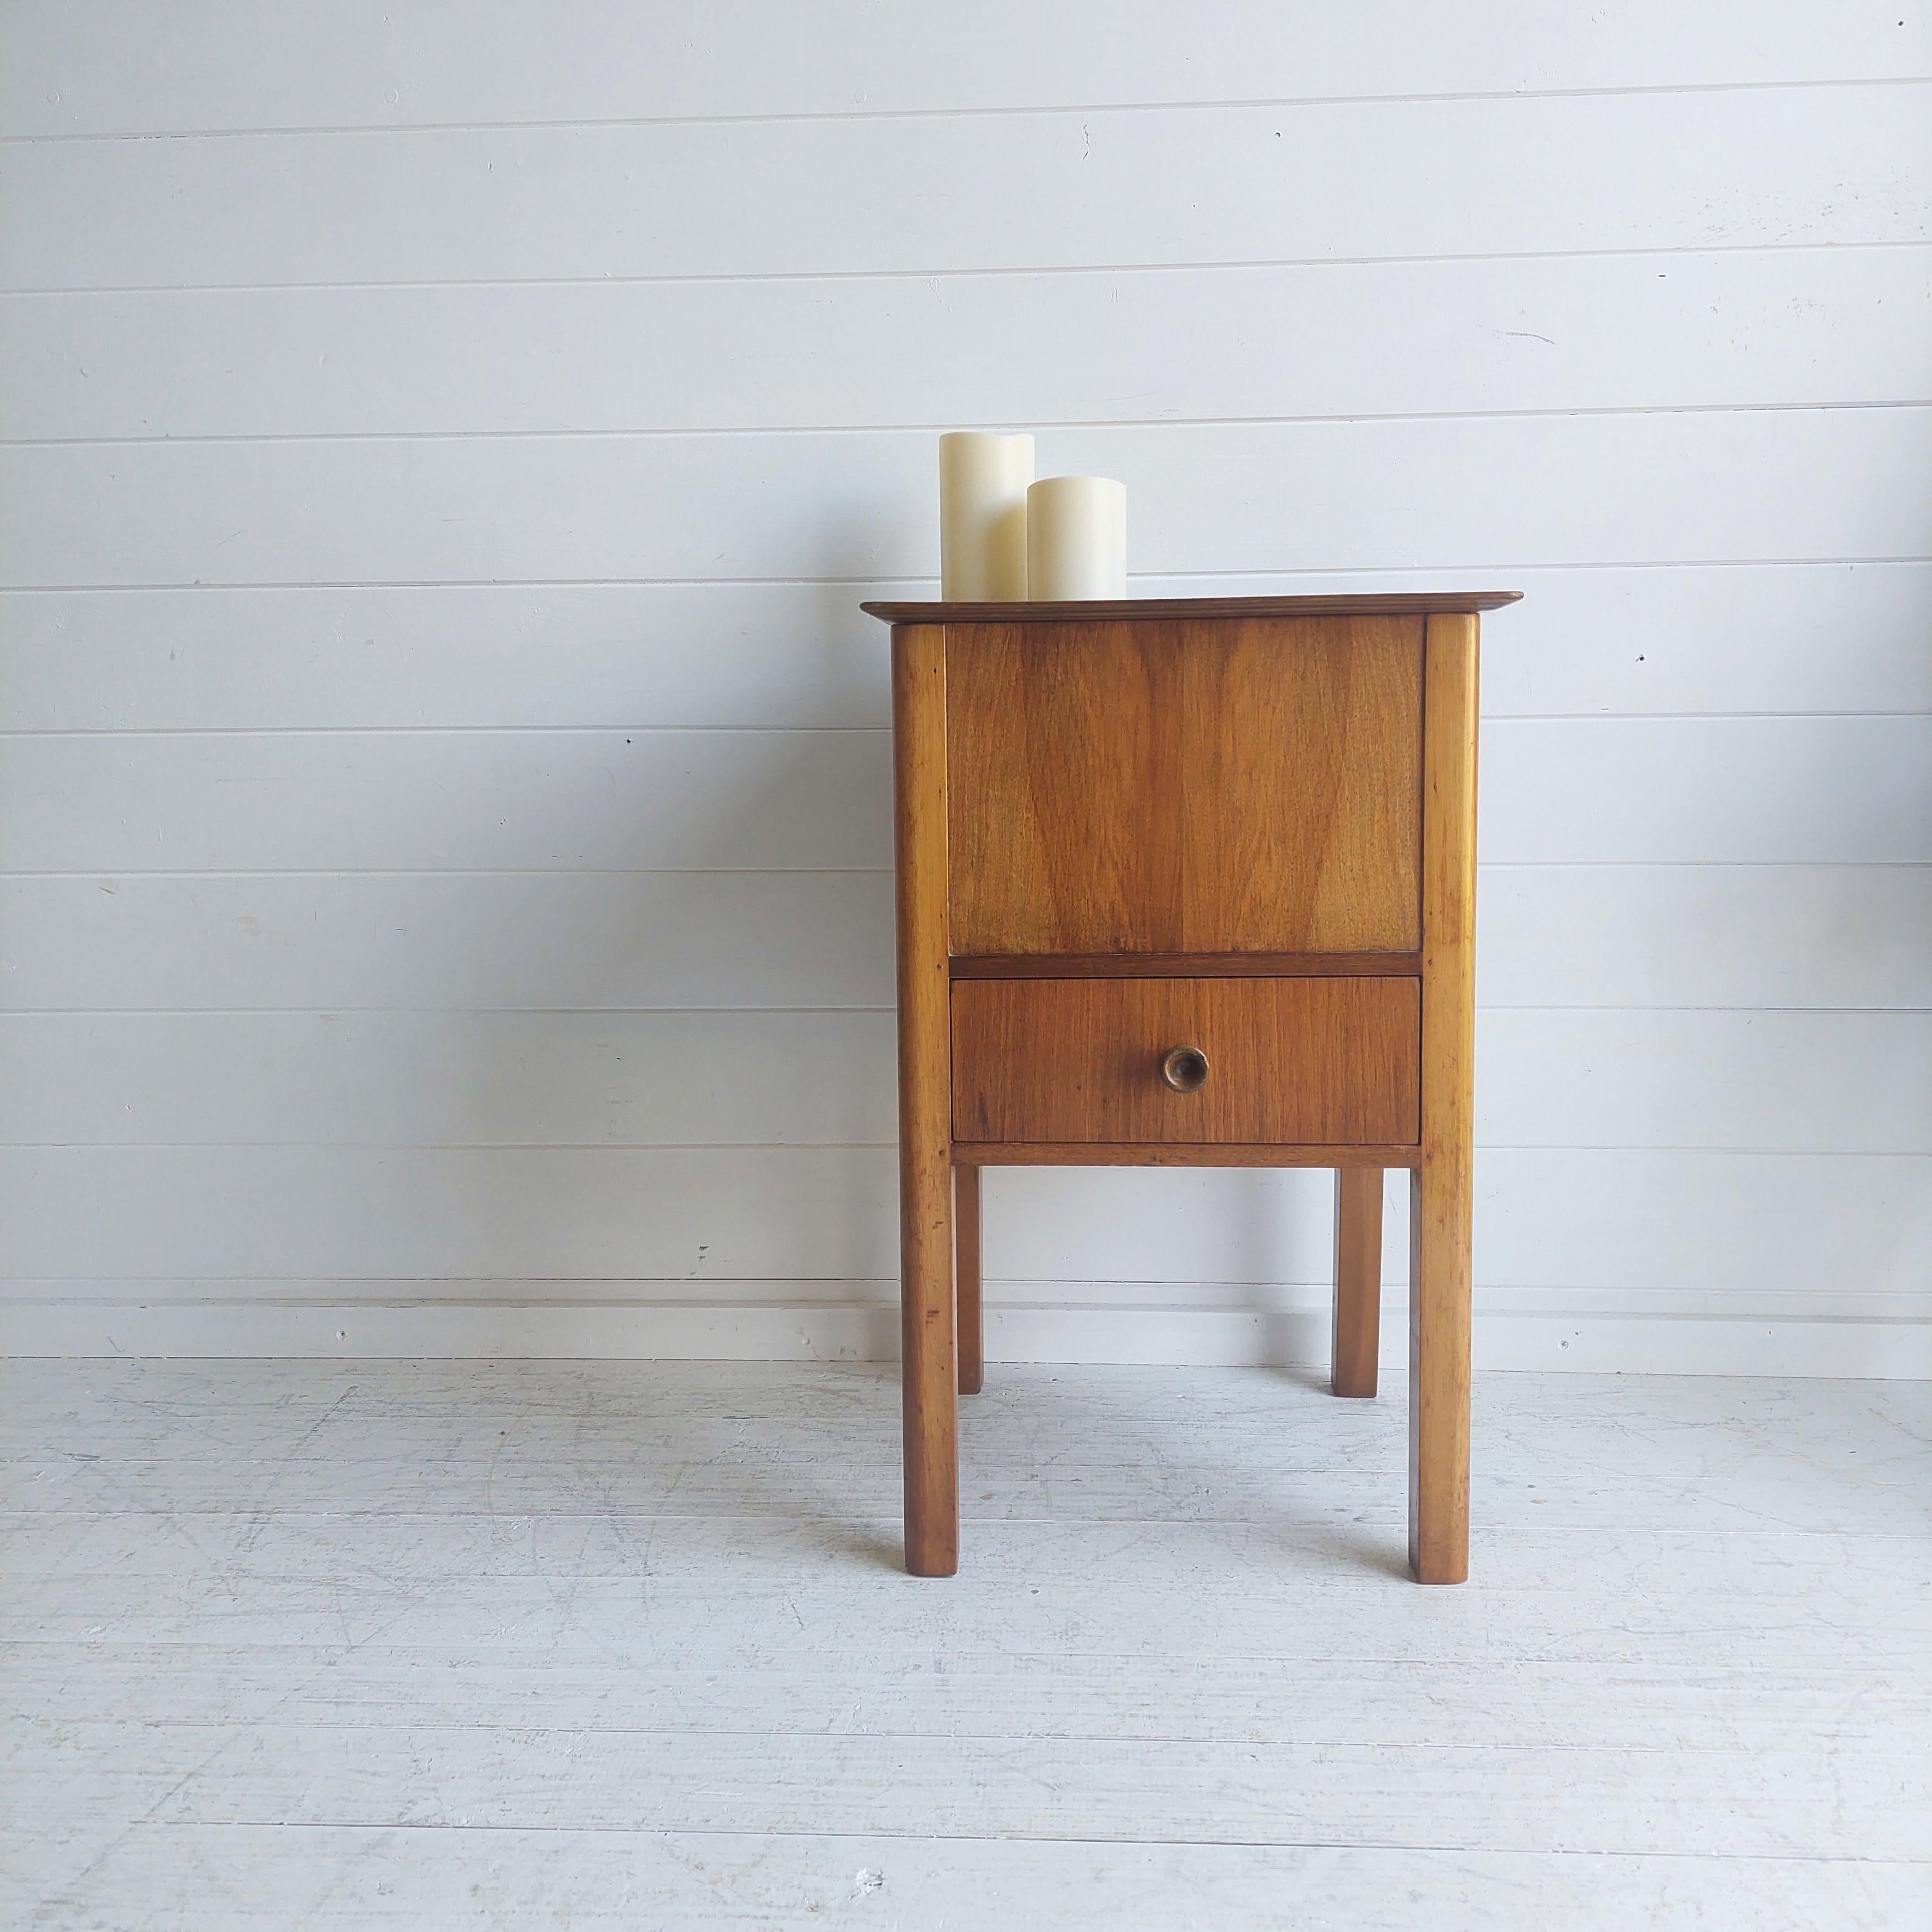 A very attractive vintage storage table, originally a sewing cabinet, made in the 1940-1950s in a typical late Art Deco/ early midcentury style
Amazing Vintage Wooden Craft / Sewing Table Side Table With Storage & Drawer. 
Absolutely beautiful